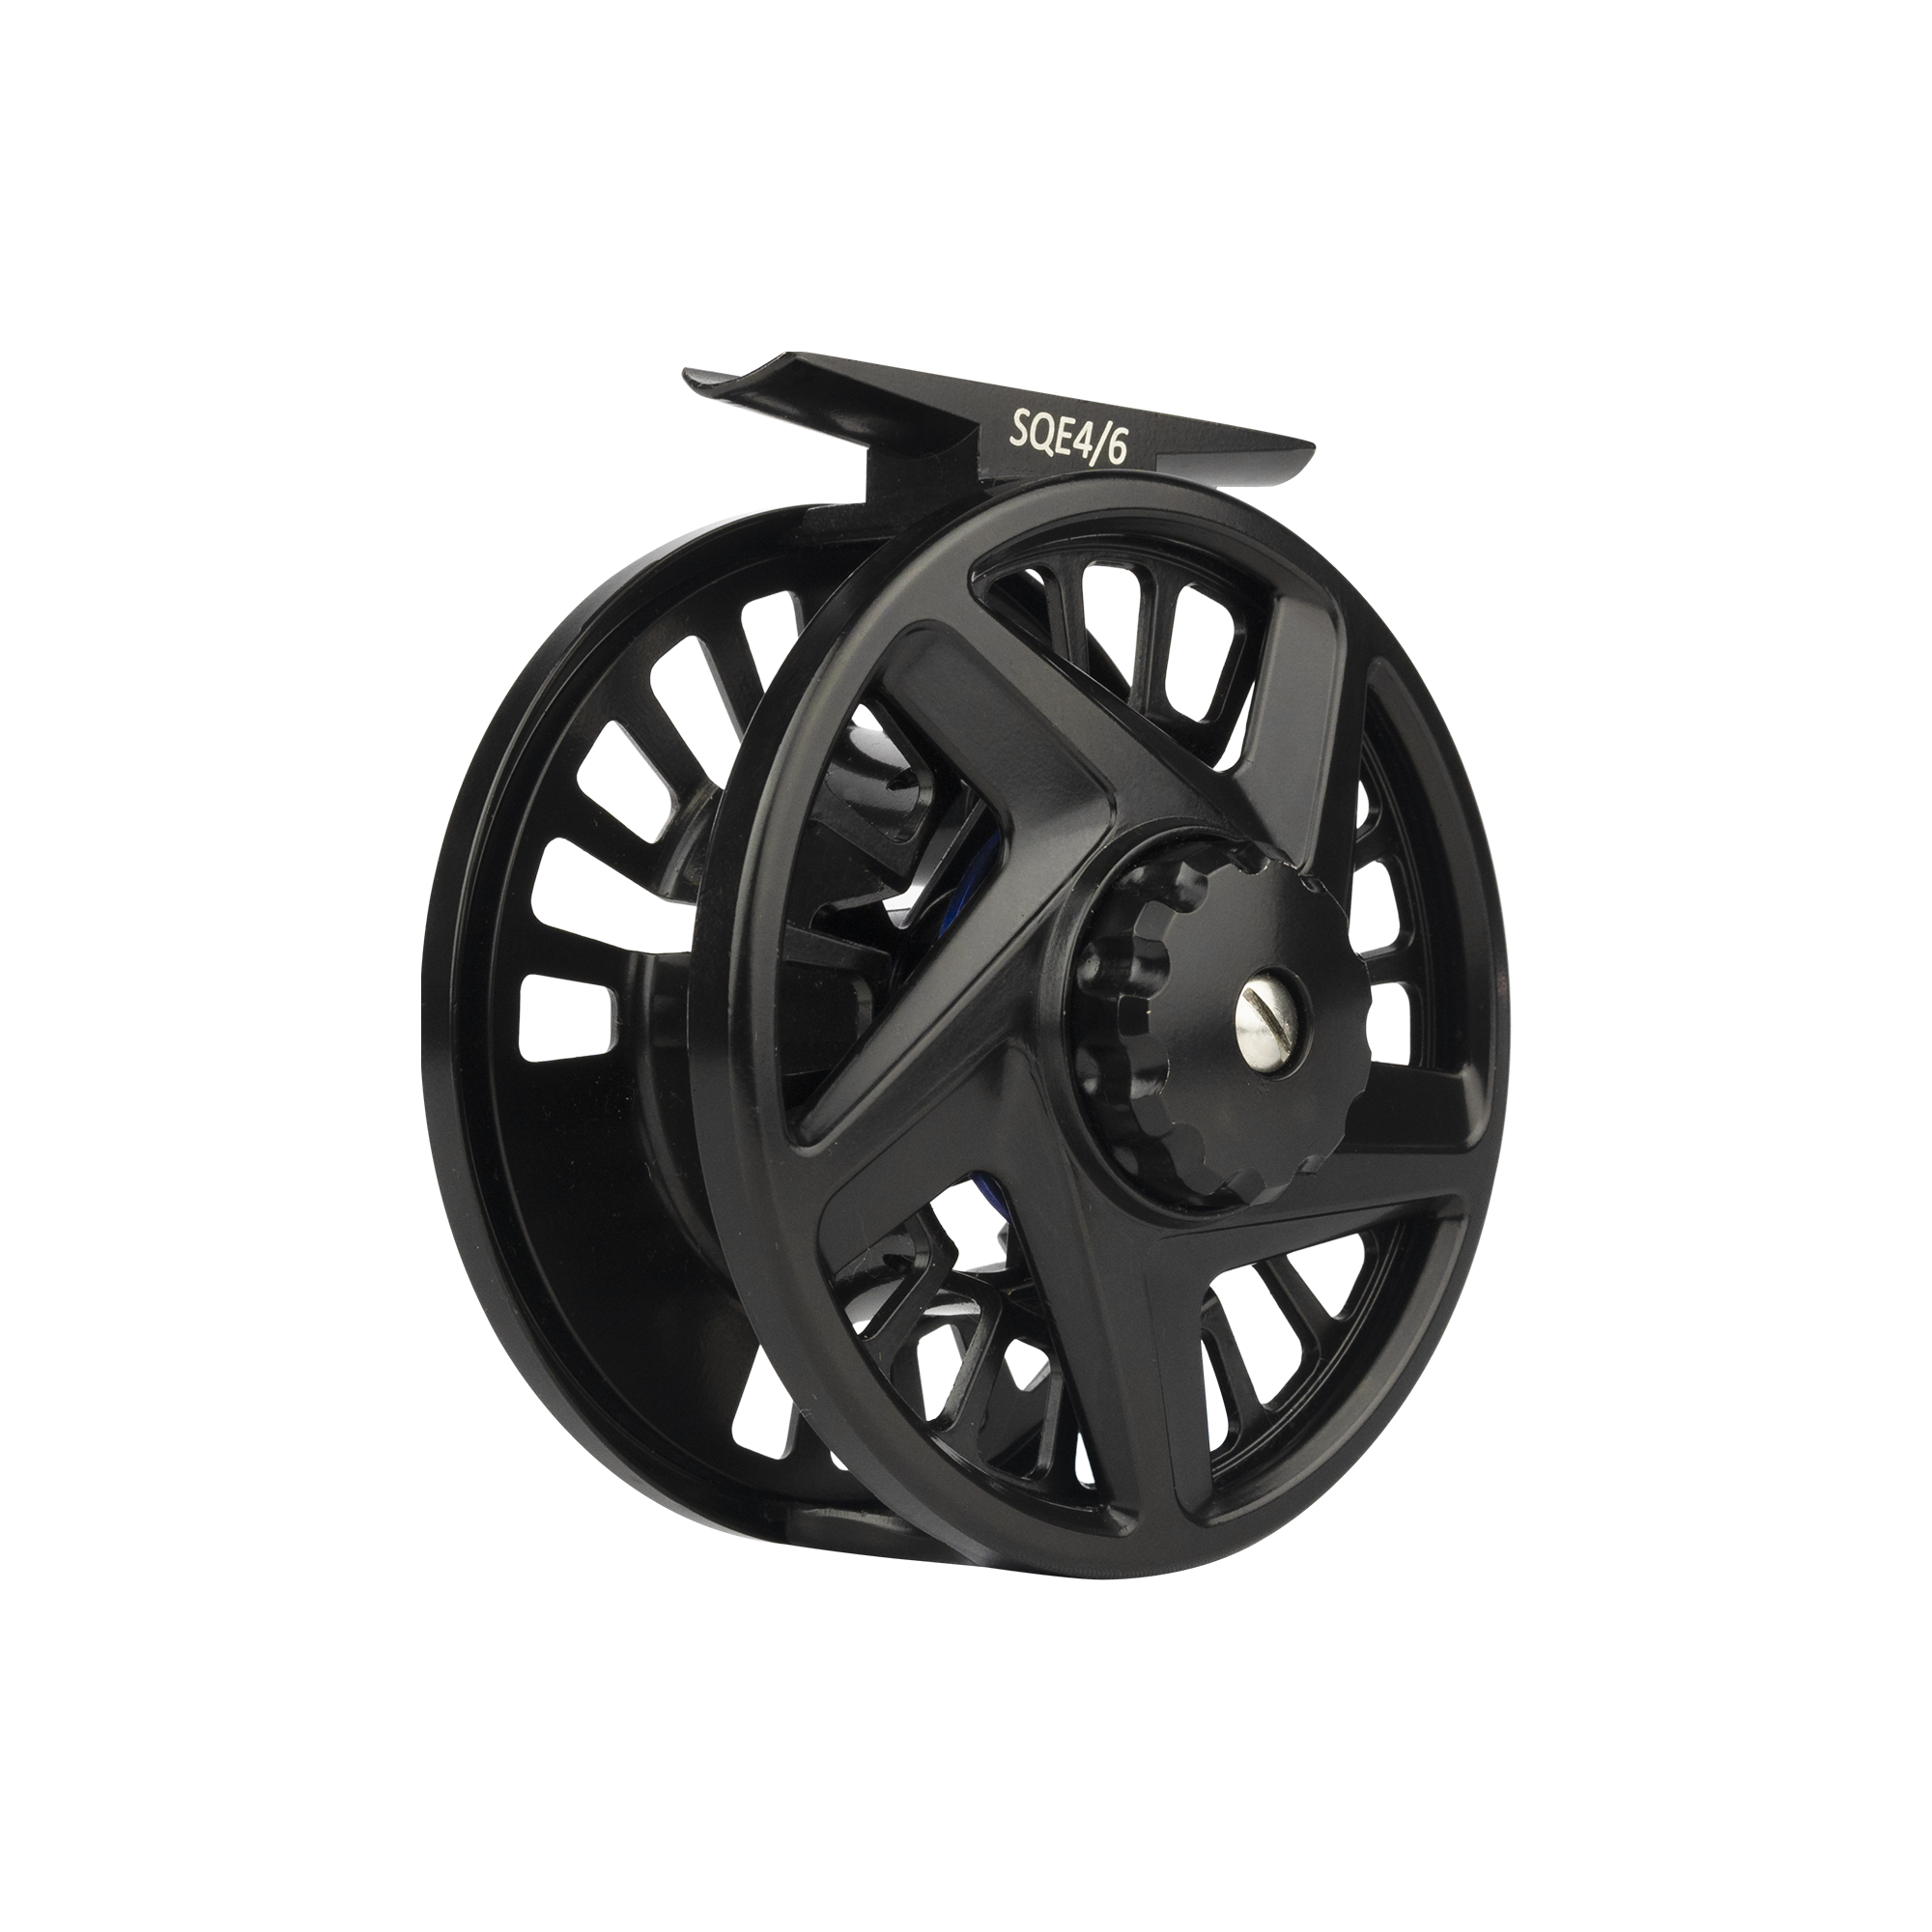 Squirrel Fly Reel